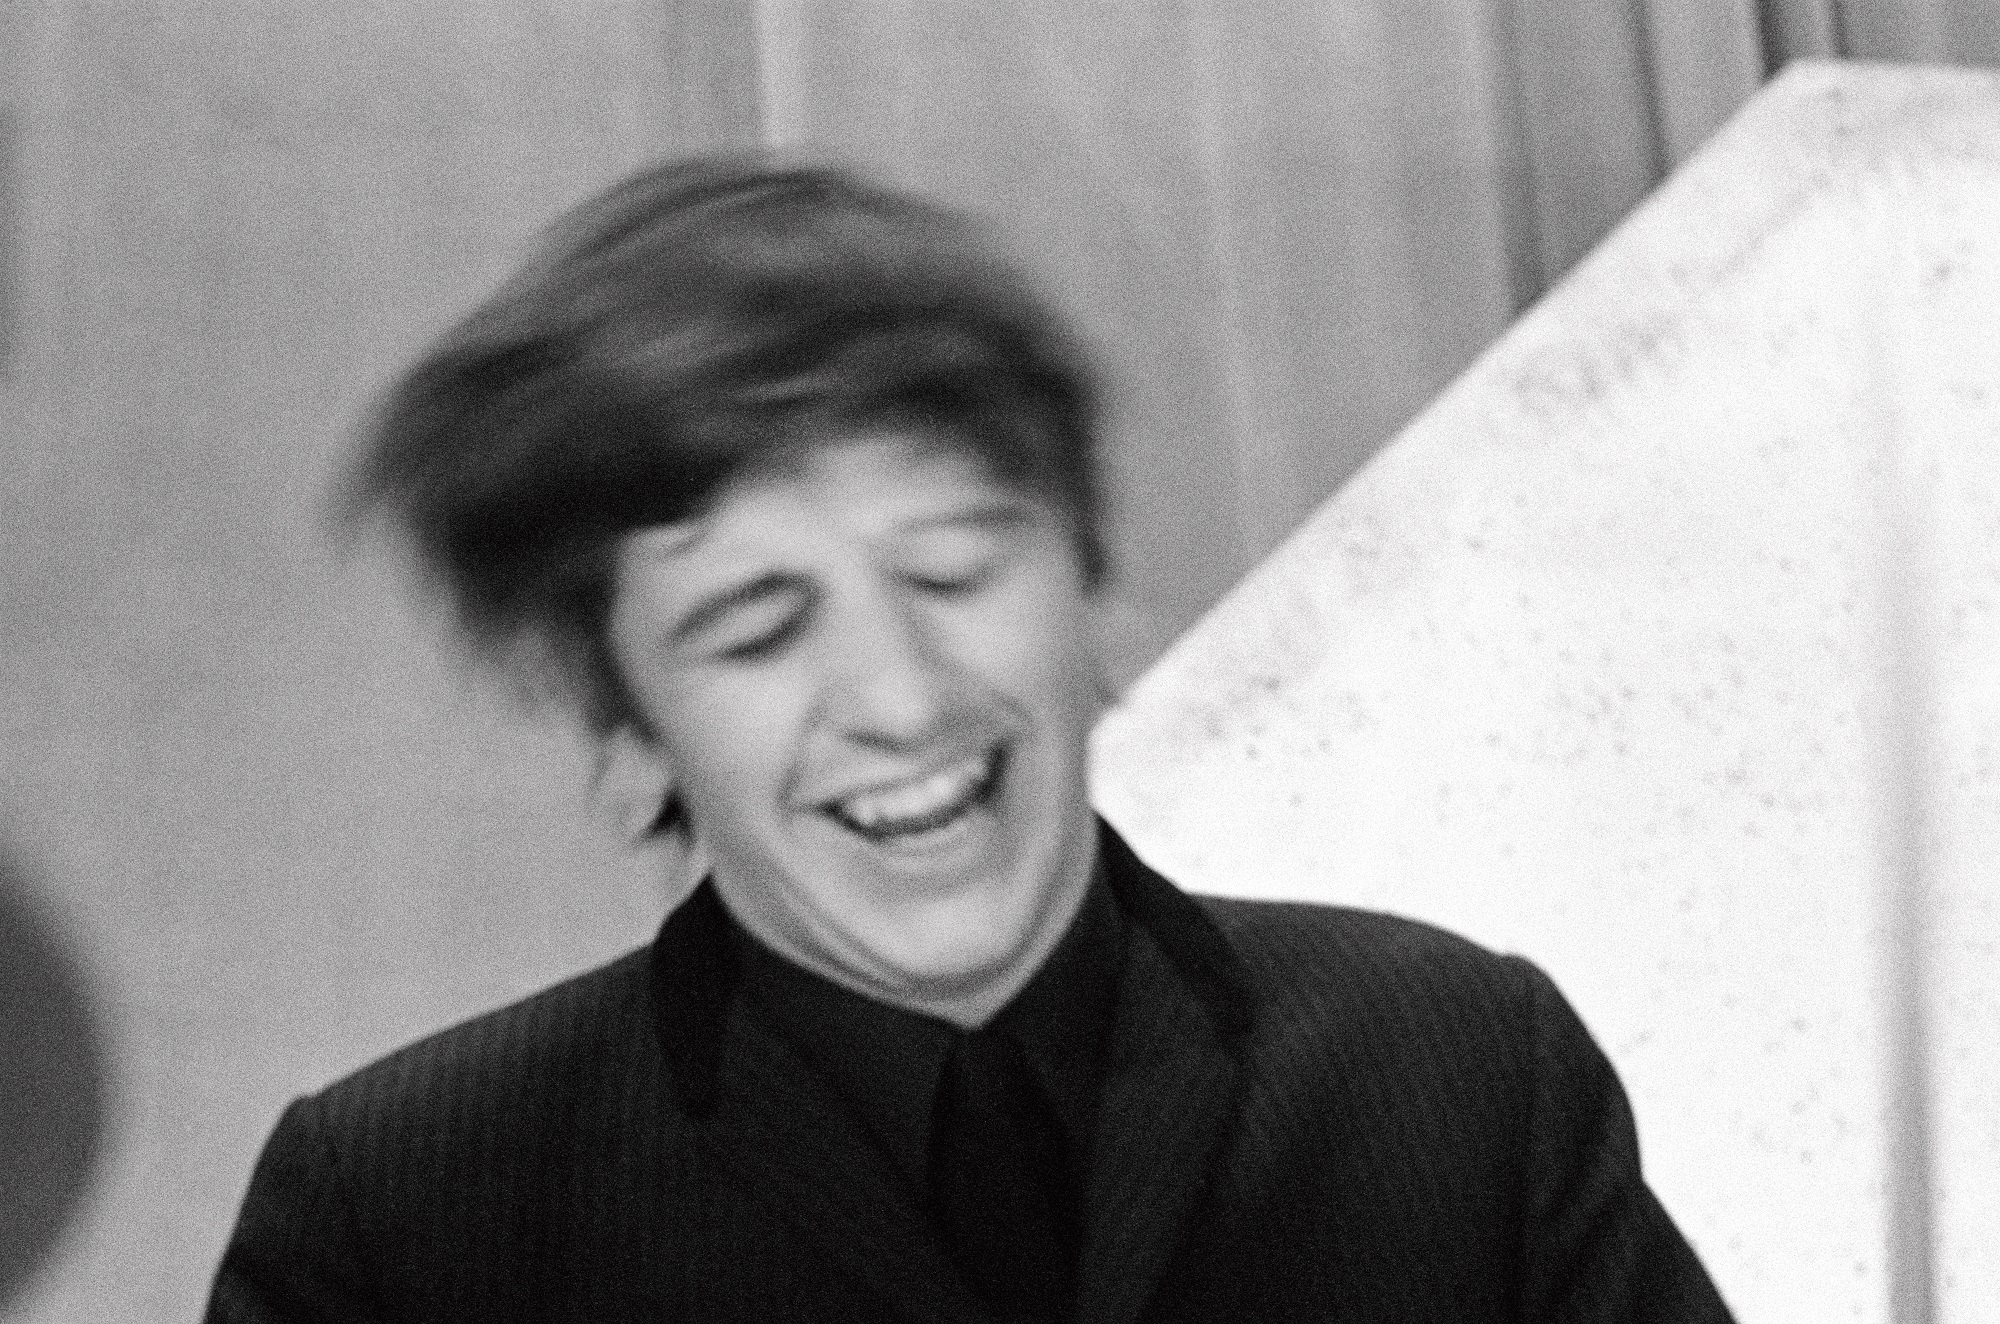 Ringo Starr. London, January 1964 © 1963 - 1964 Paul McCartney under exclusive license to MPL Archive LLP